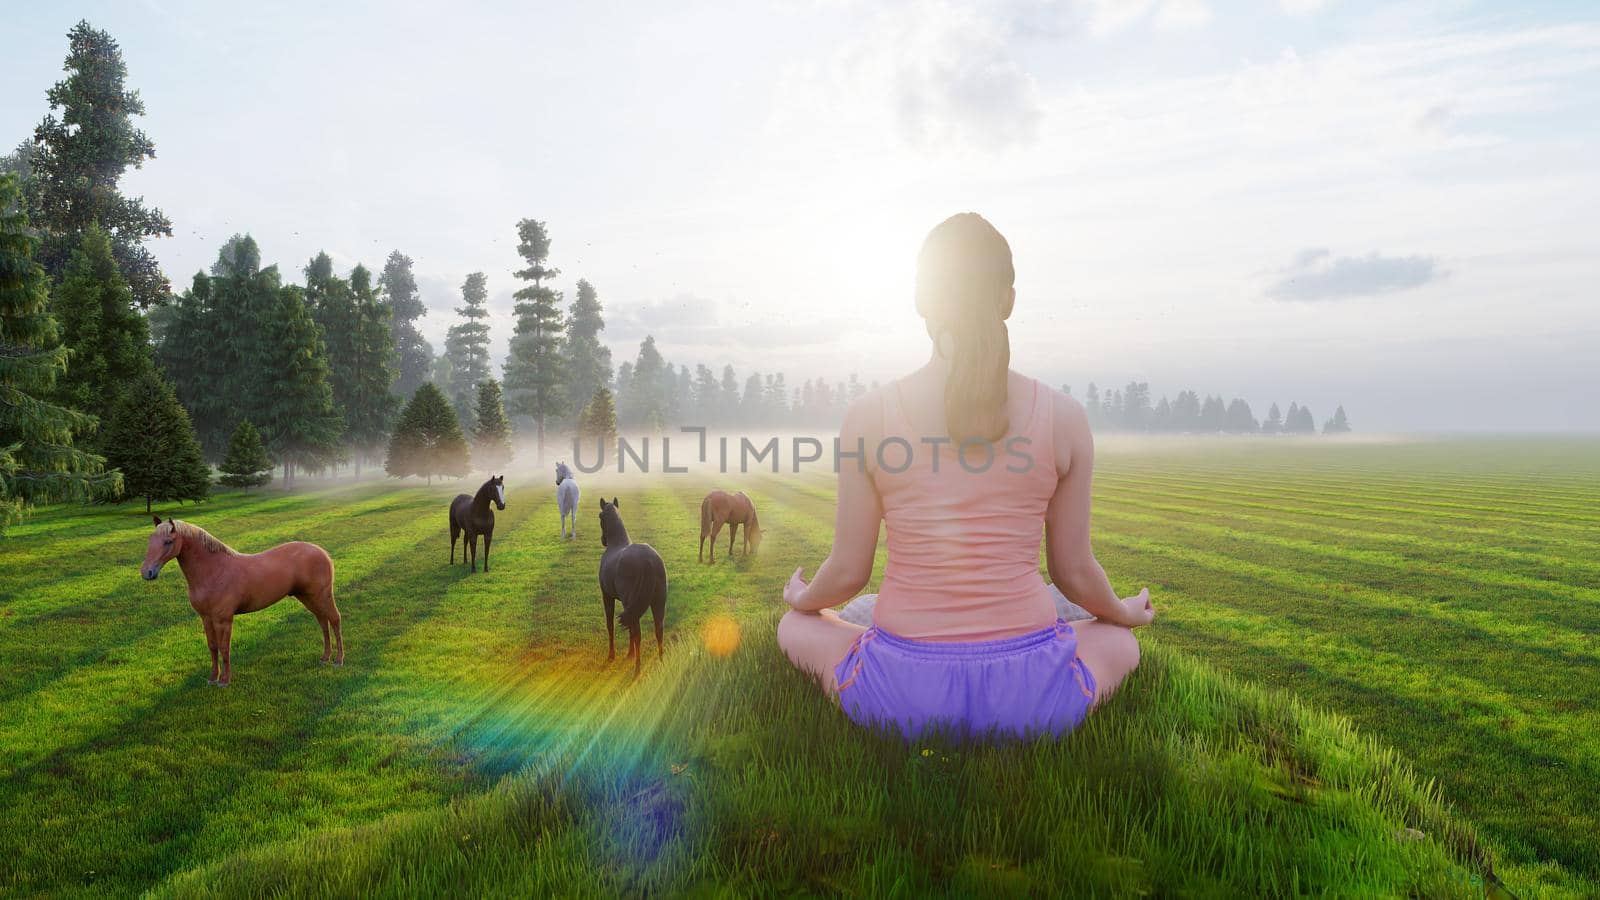 A beautiful young woman is sitting in the Lotus position on the green grass near a beautiful forest. Yoga classes in nature early in the morning.